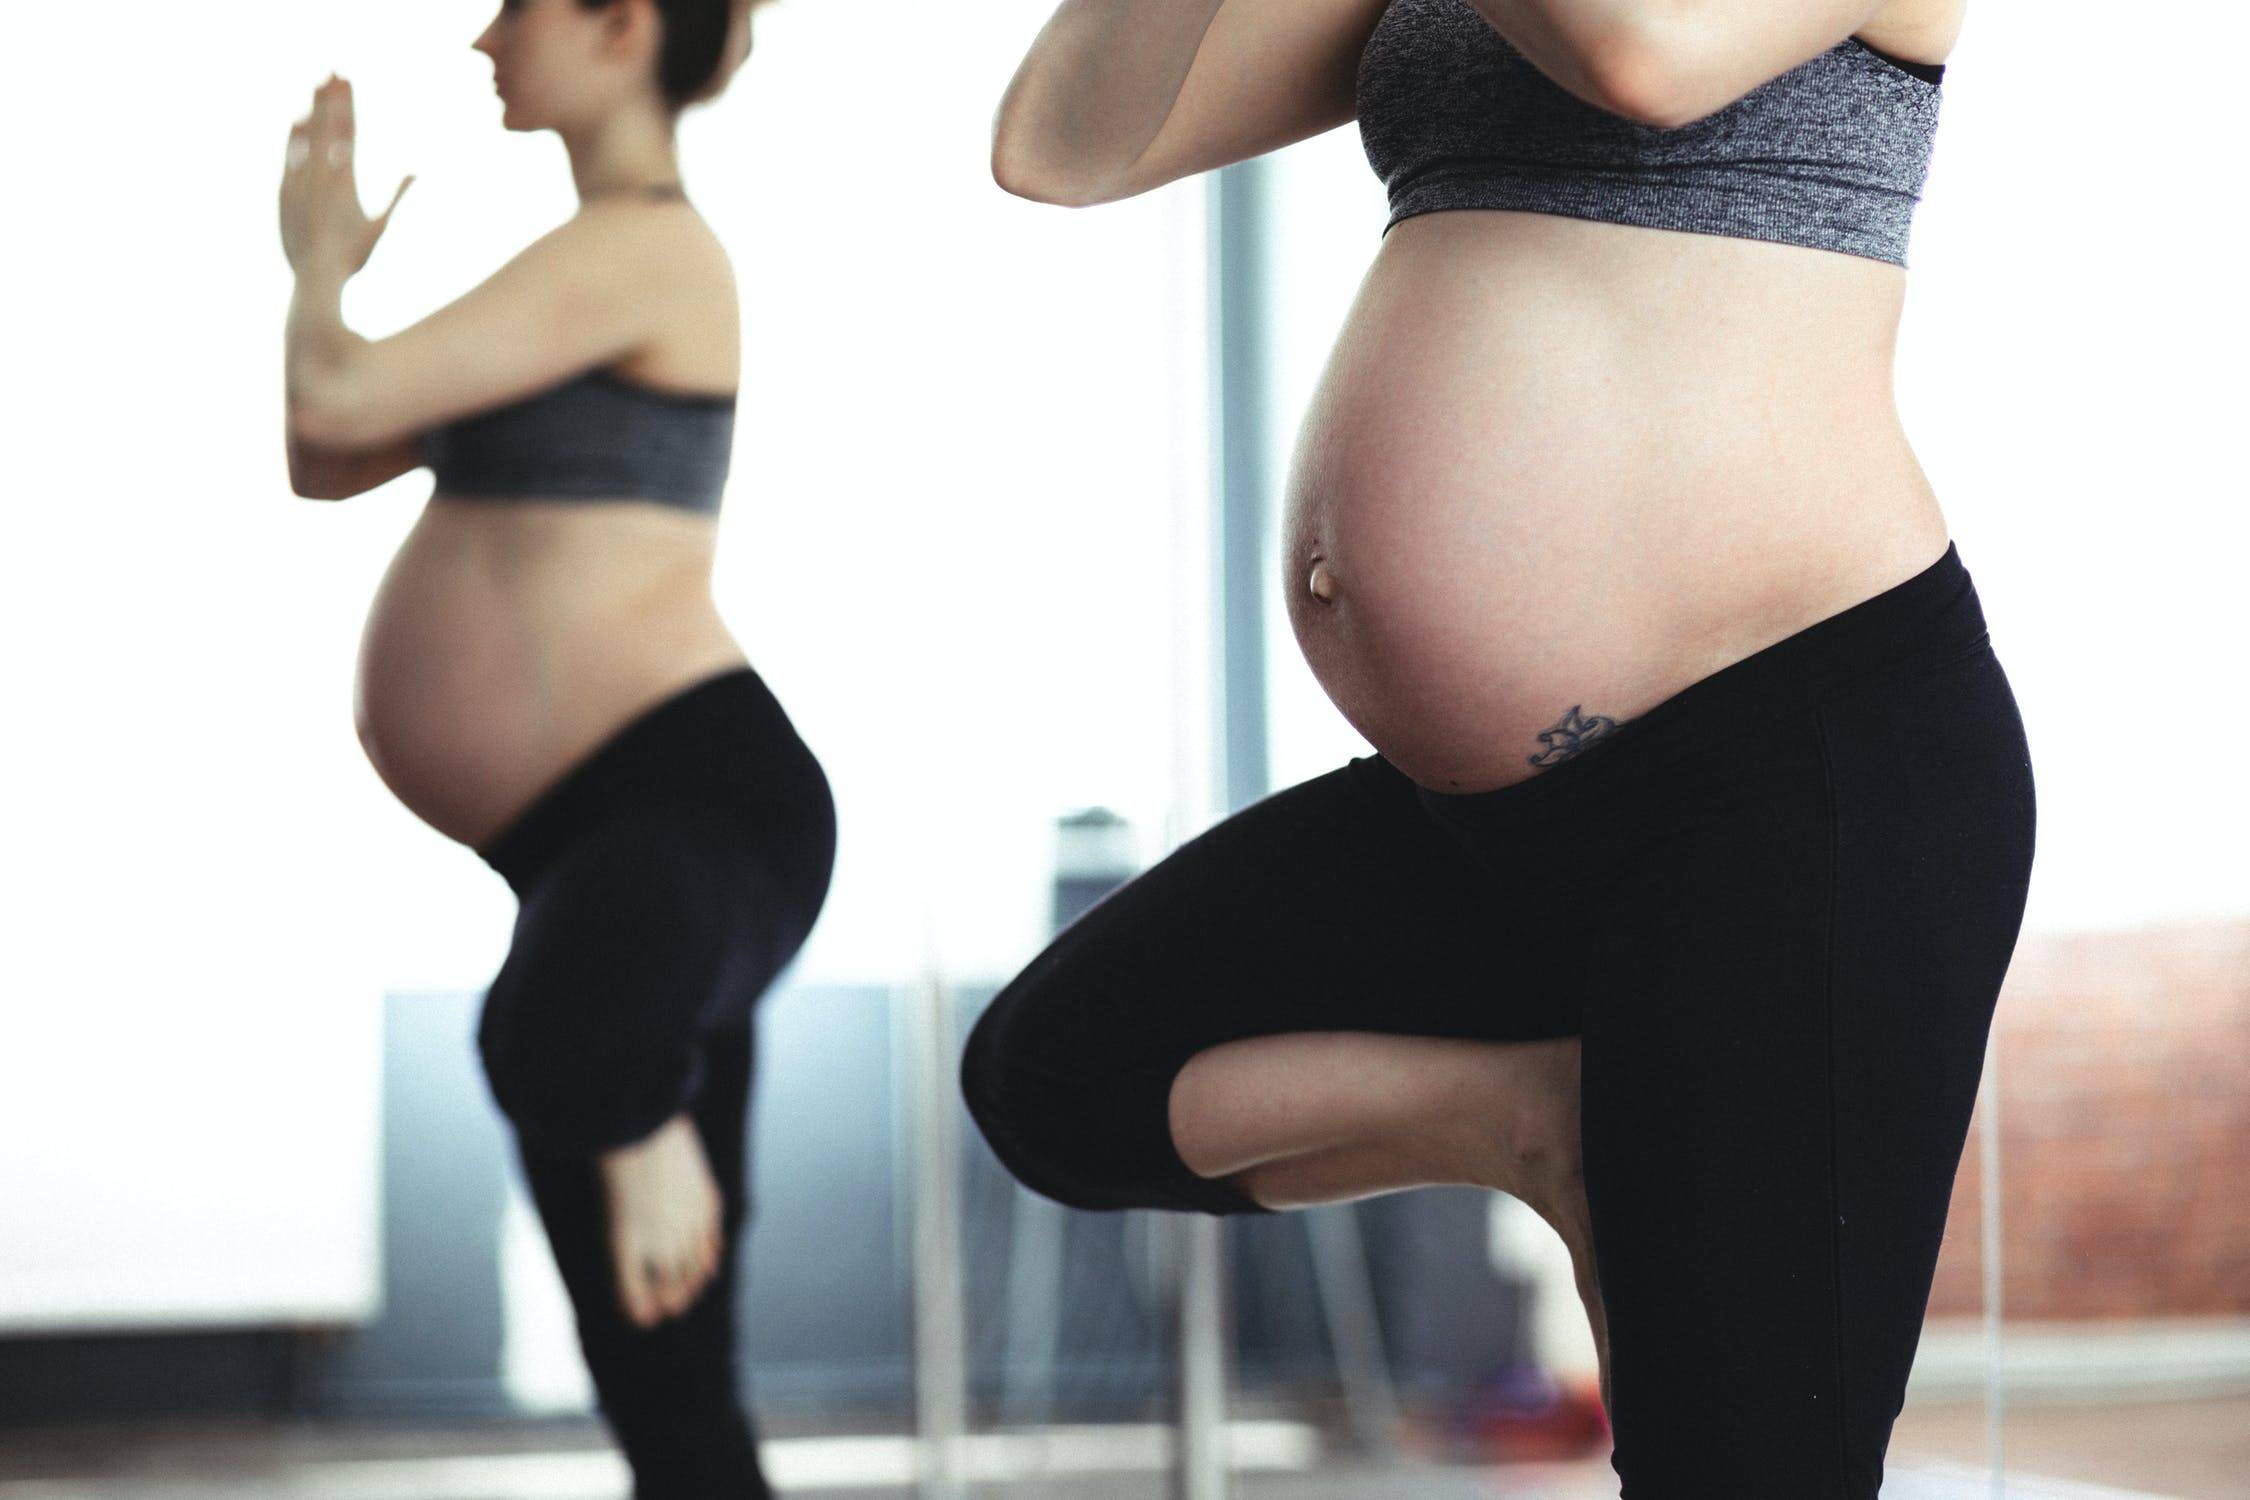 11 pregnancy exercise tips from Lucy Gornall